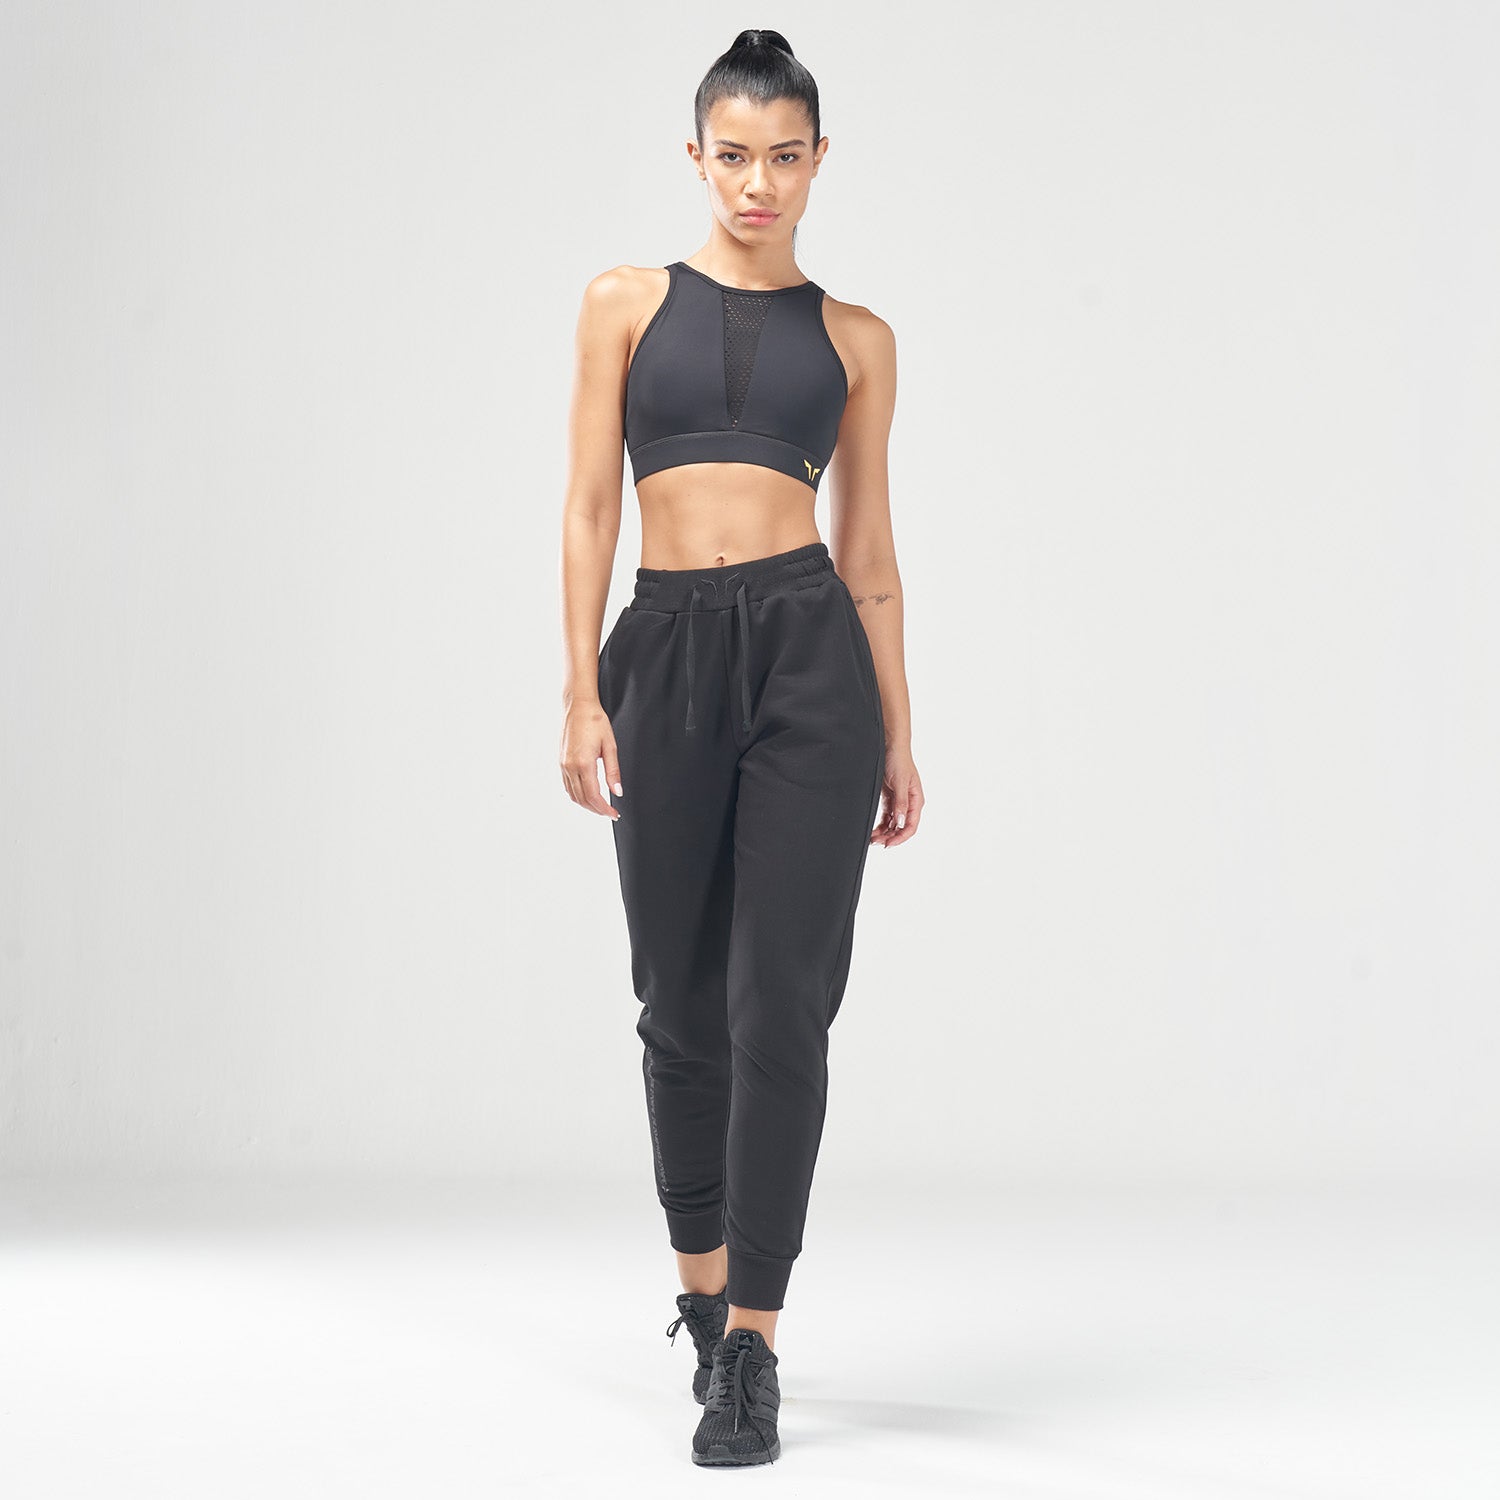 AE | Code Relaxed Joggers - Black | Workout Pants Women | SQUATWOLF